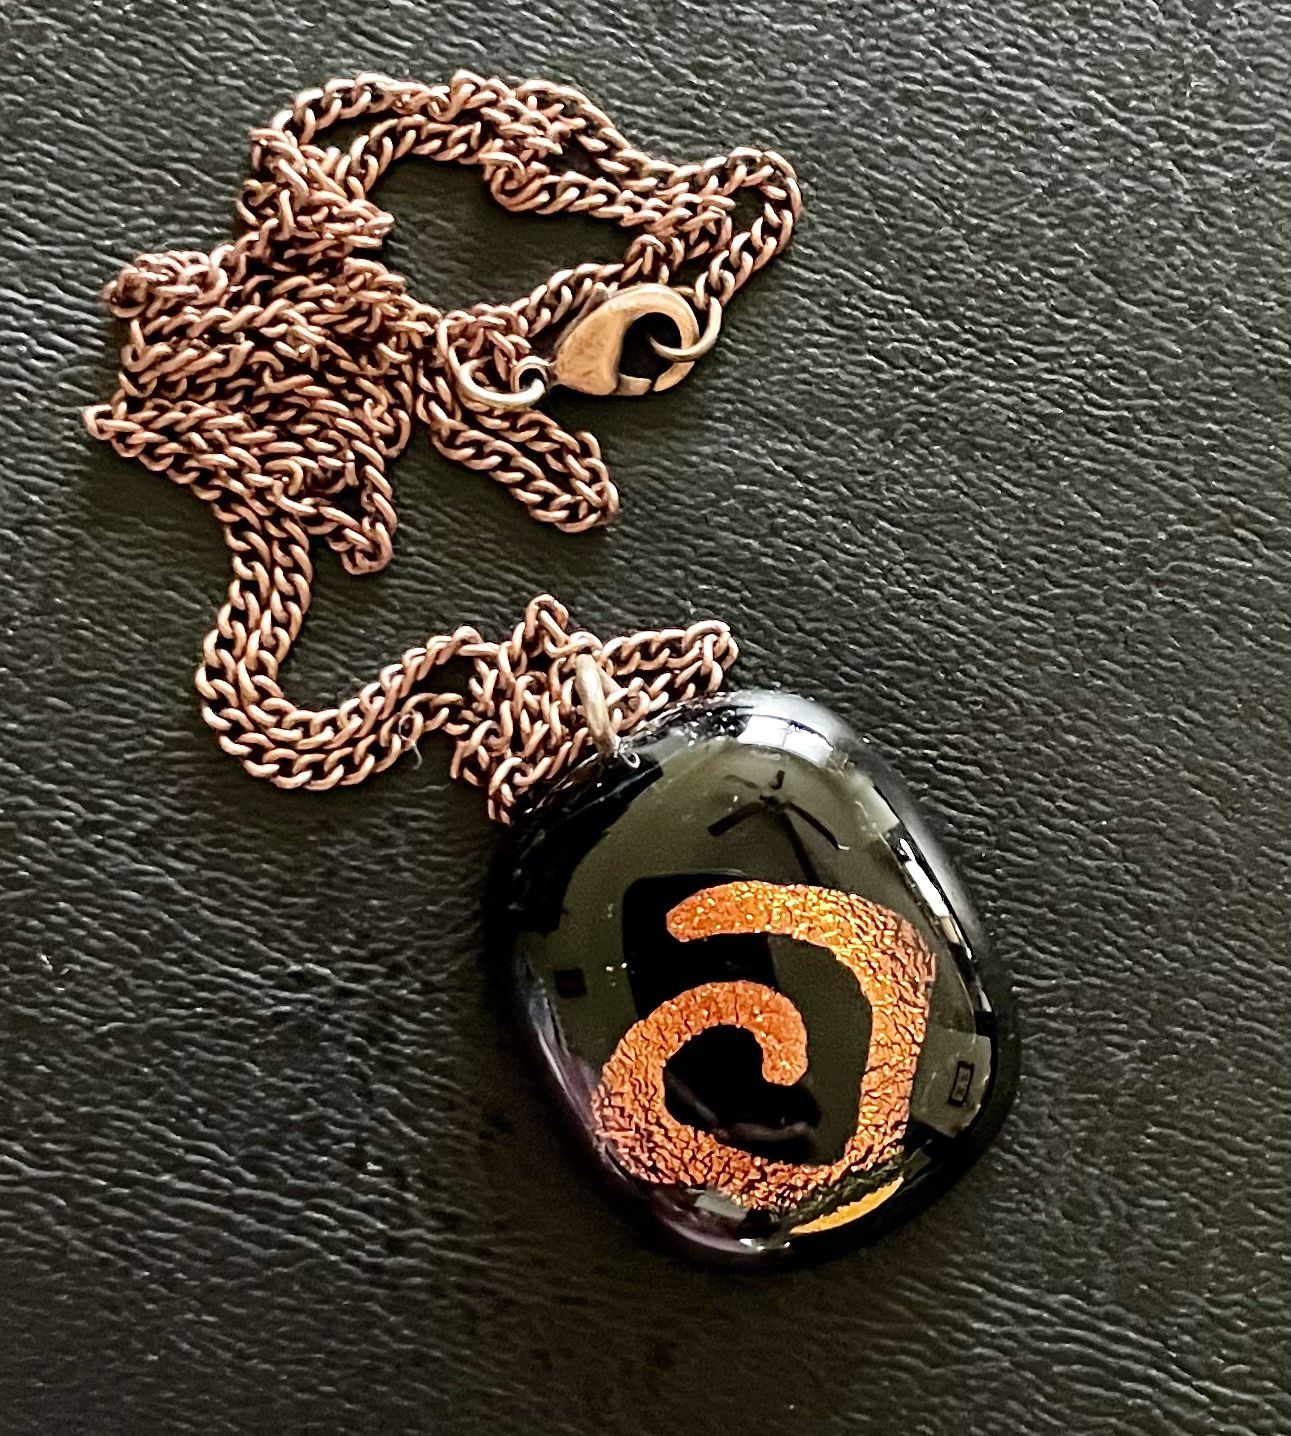 Glass Pendant  with Chain 